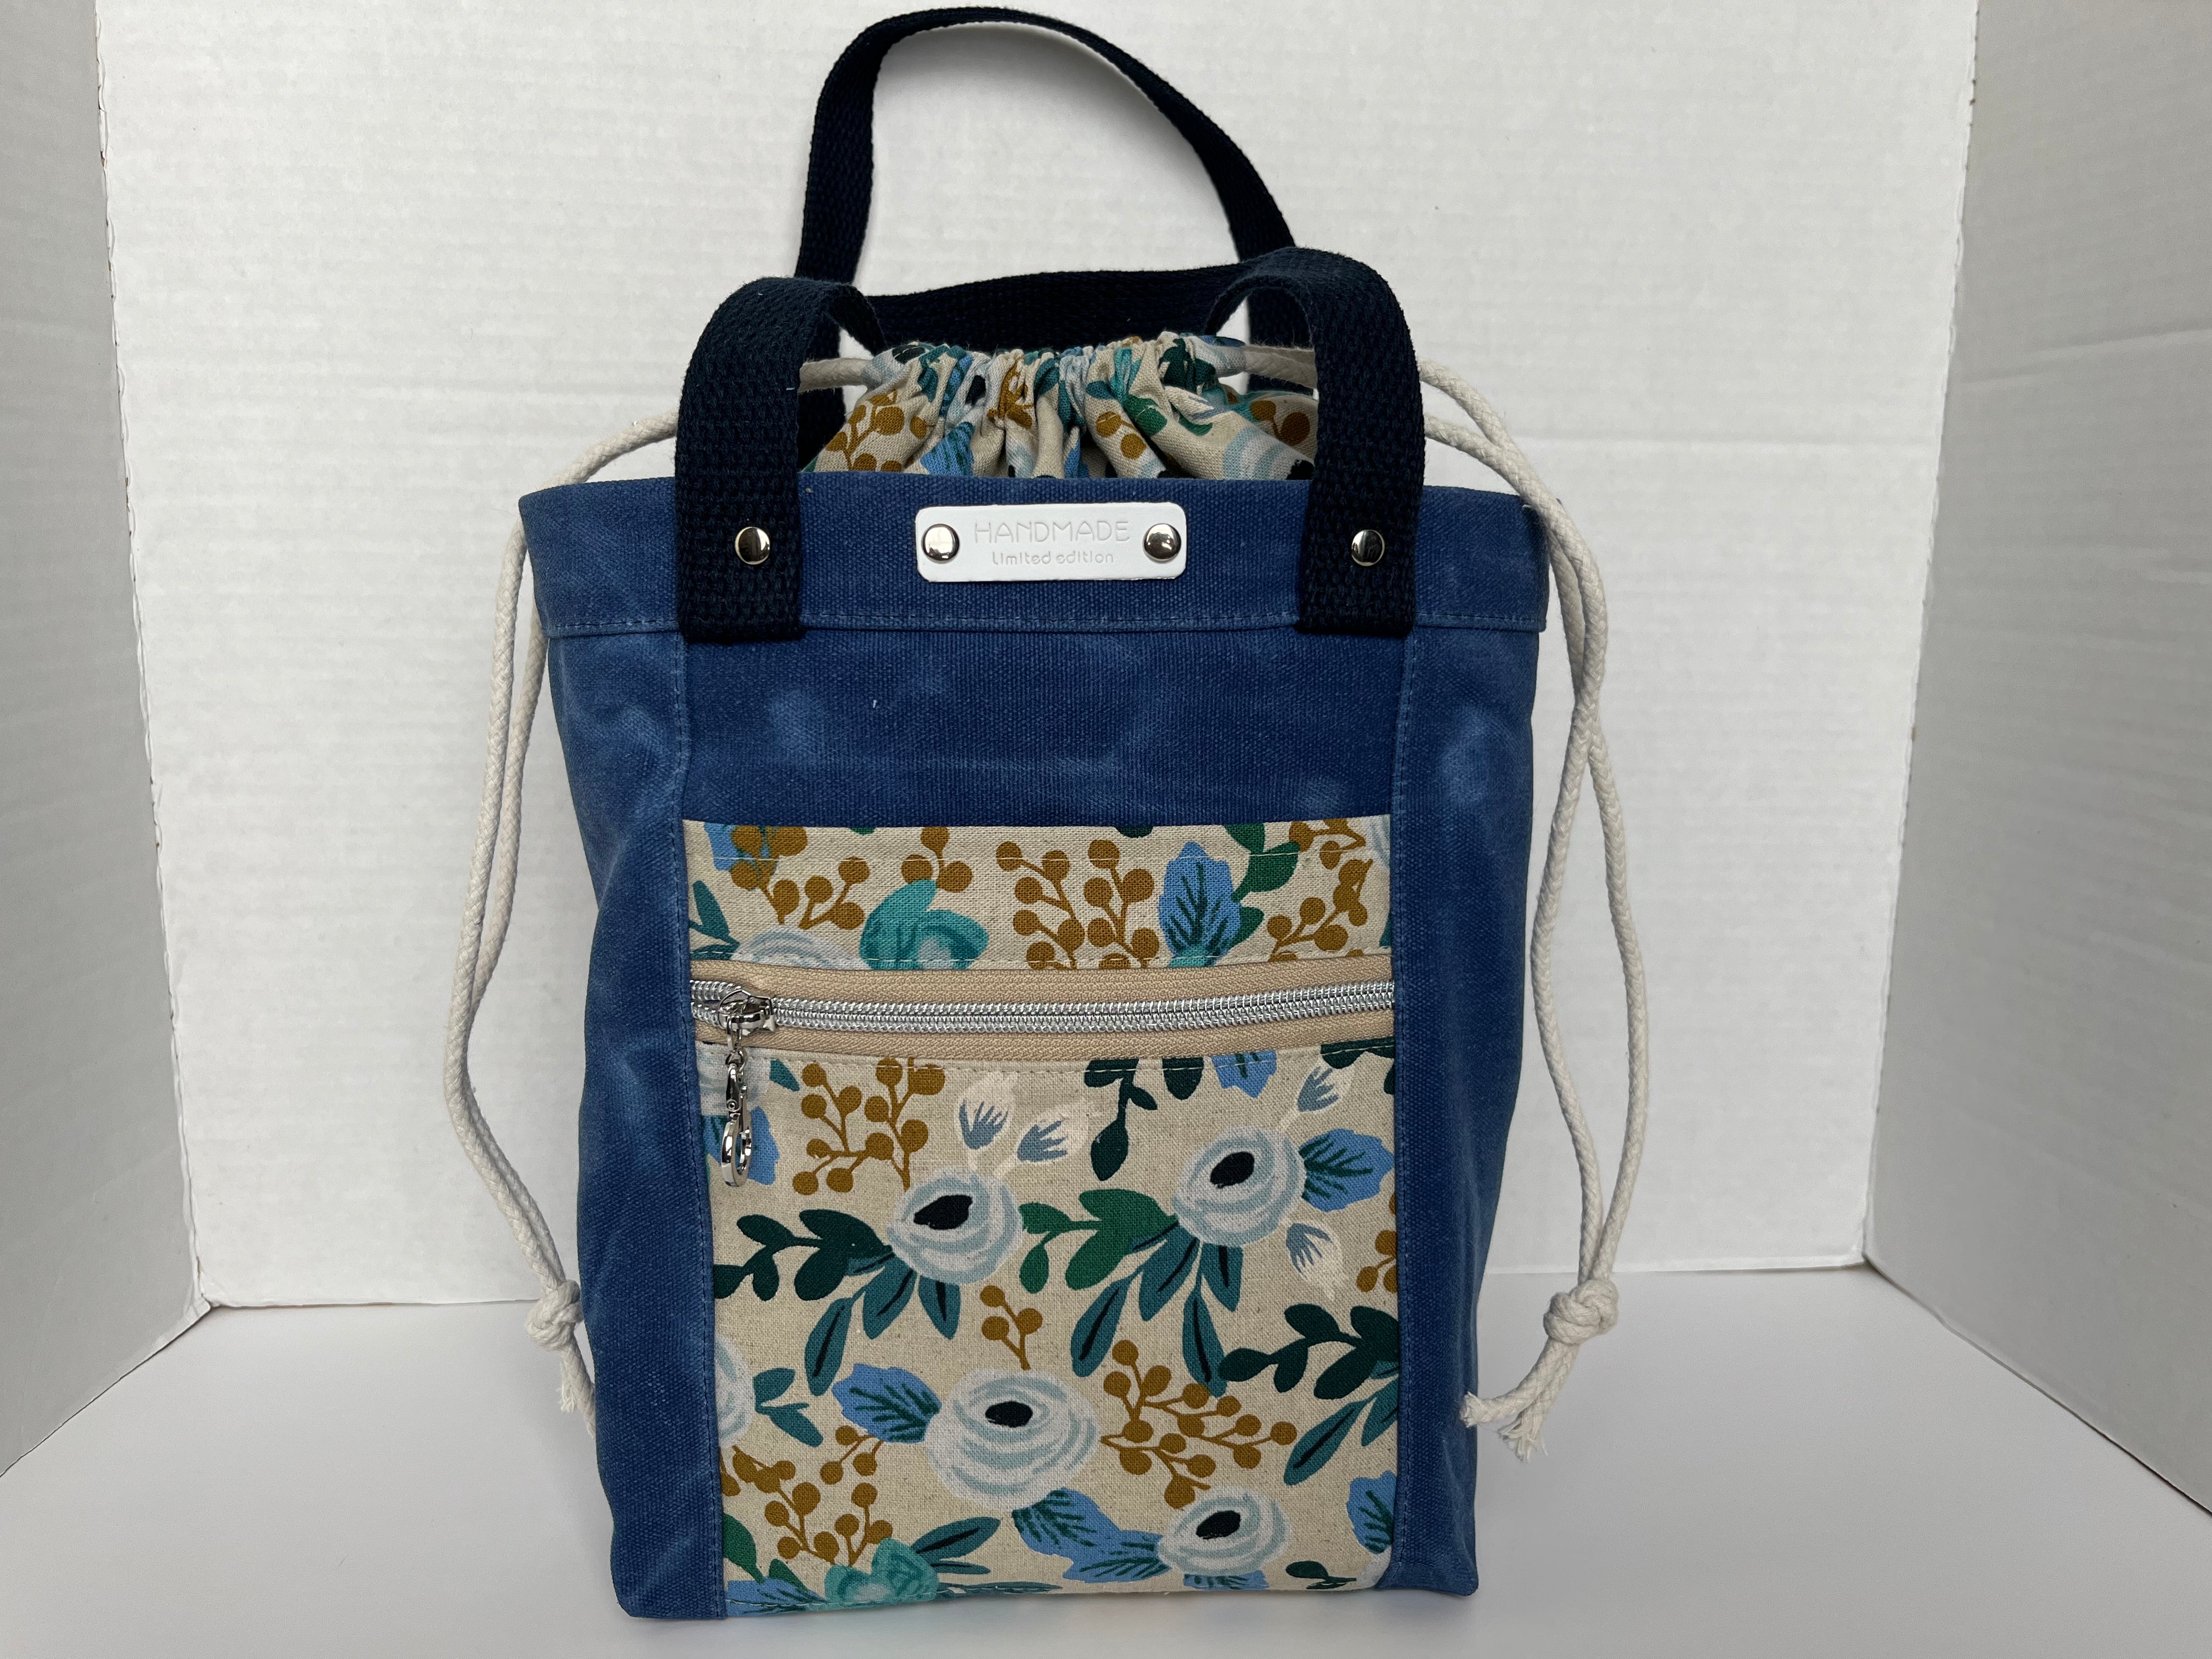 Firefly Tote bag Project Bag Workshop All fabrics included in the